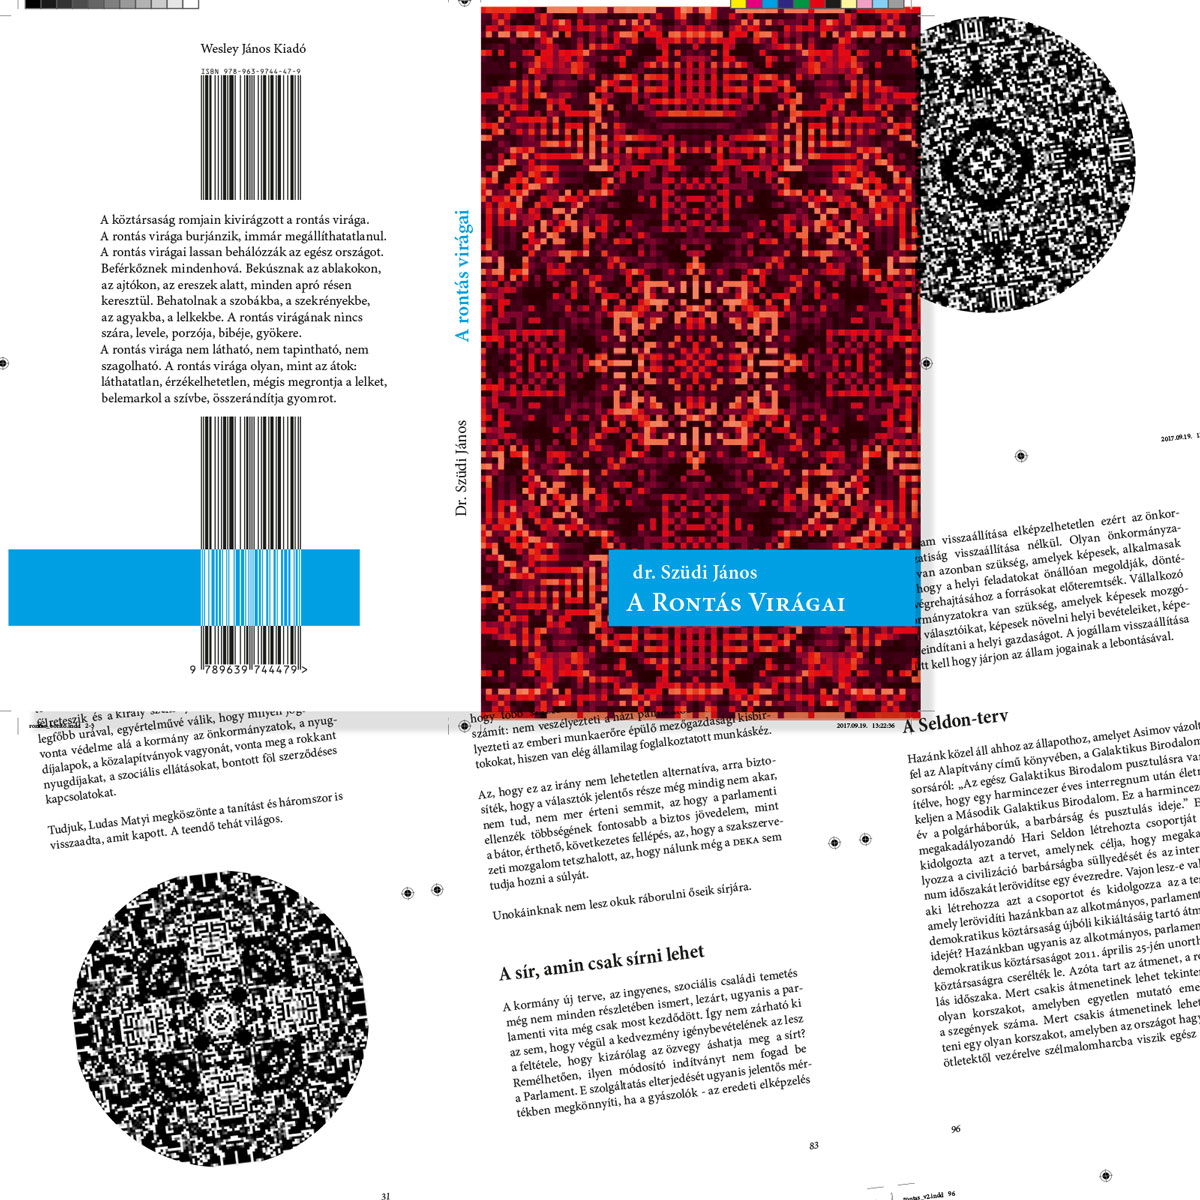 book cover with cellular automata